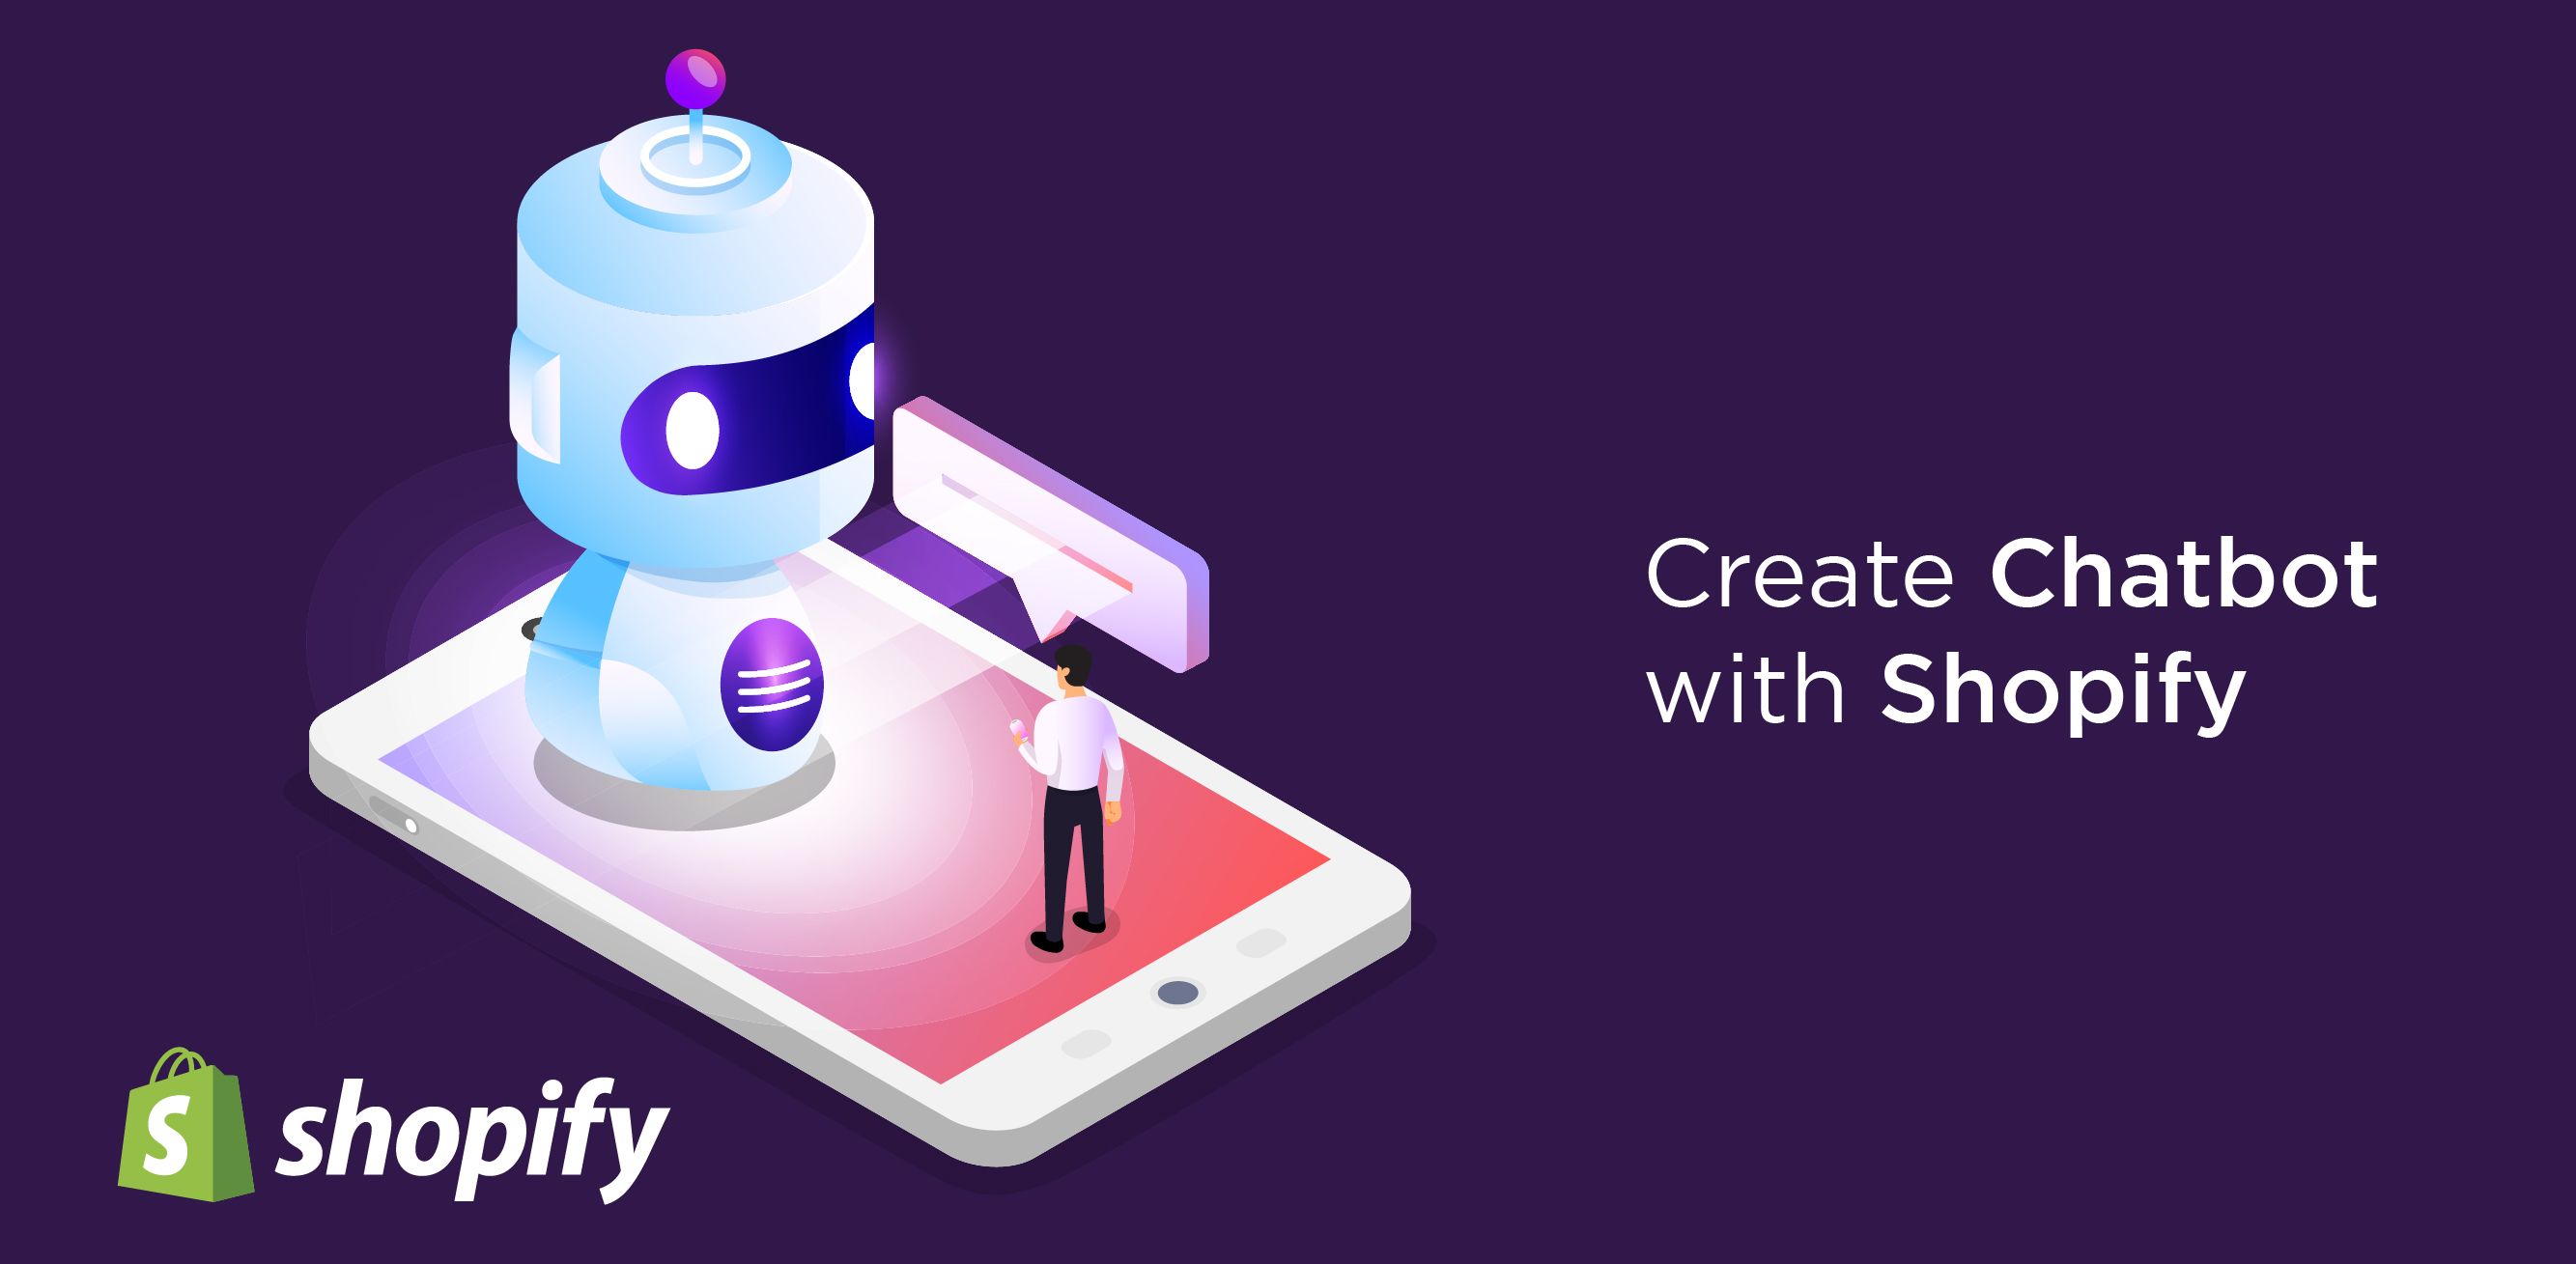 Create your own Chatbot with Shopify